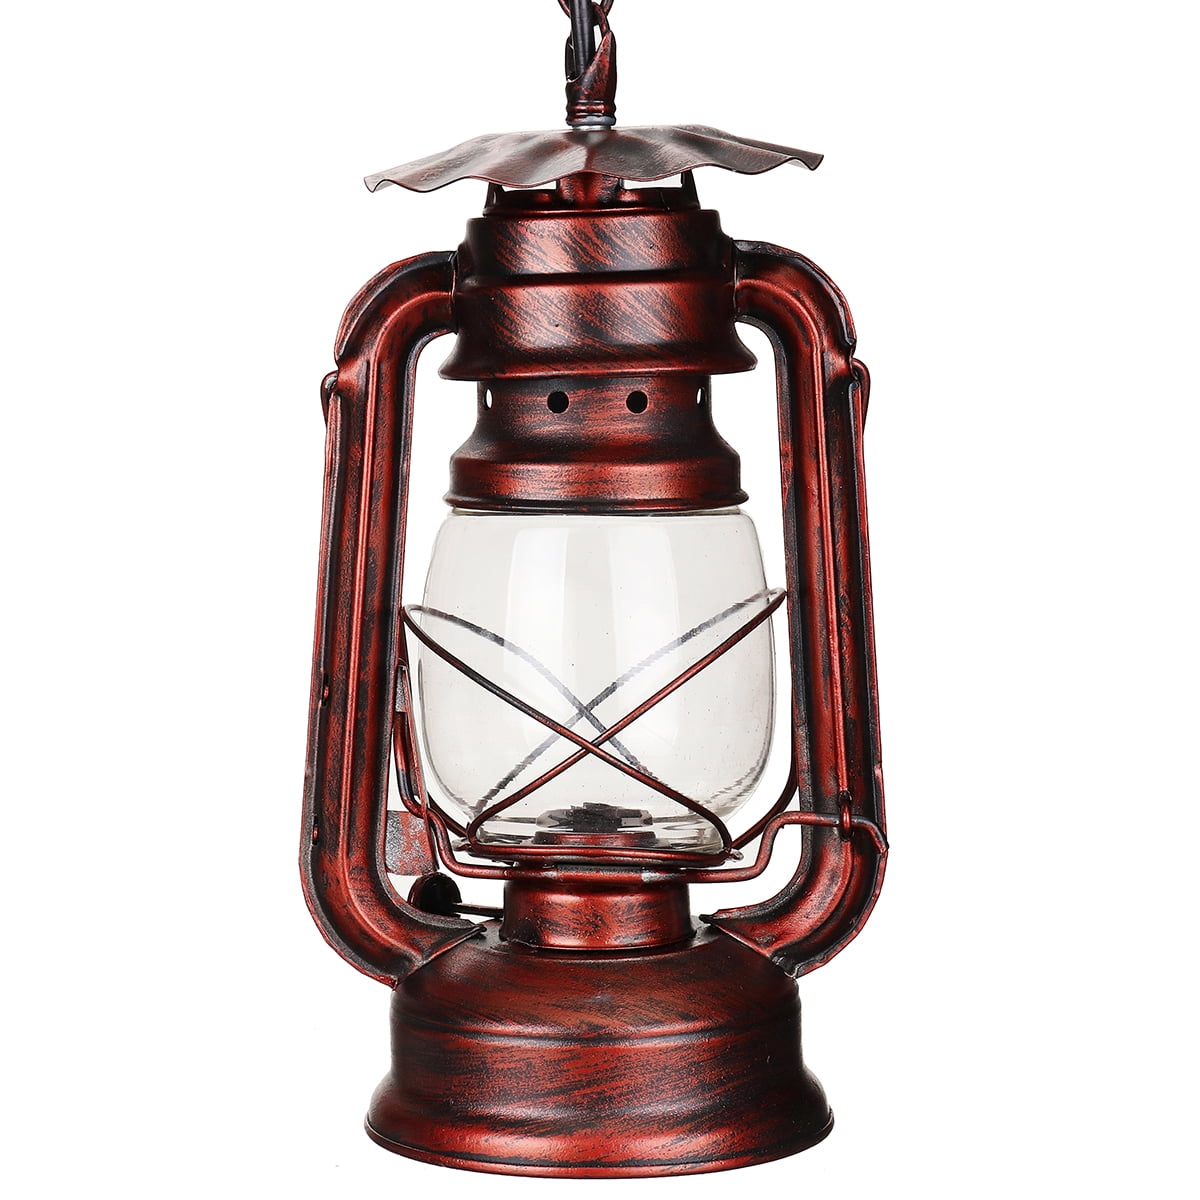 Vintage Rustic Glass Pendant Ceiling Lamp Wall Sconce Light Lantern Outdoor Cafe 